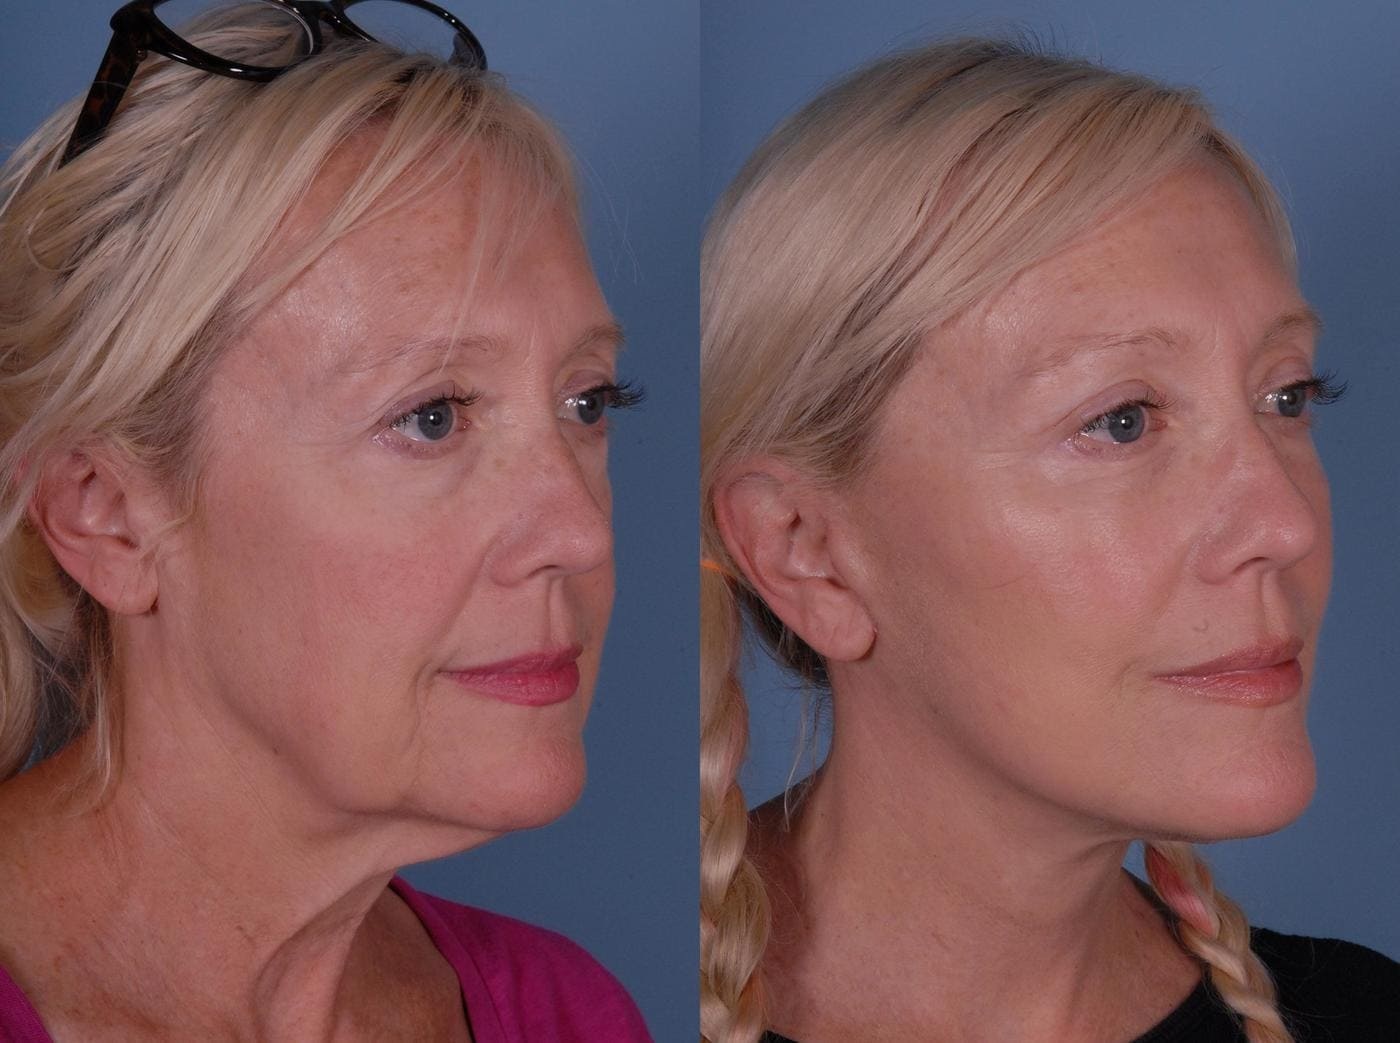 Is a Mini Facelift the Right Procedure for Me?